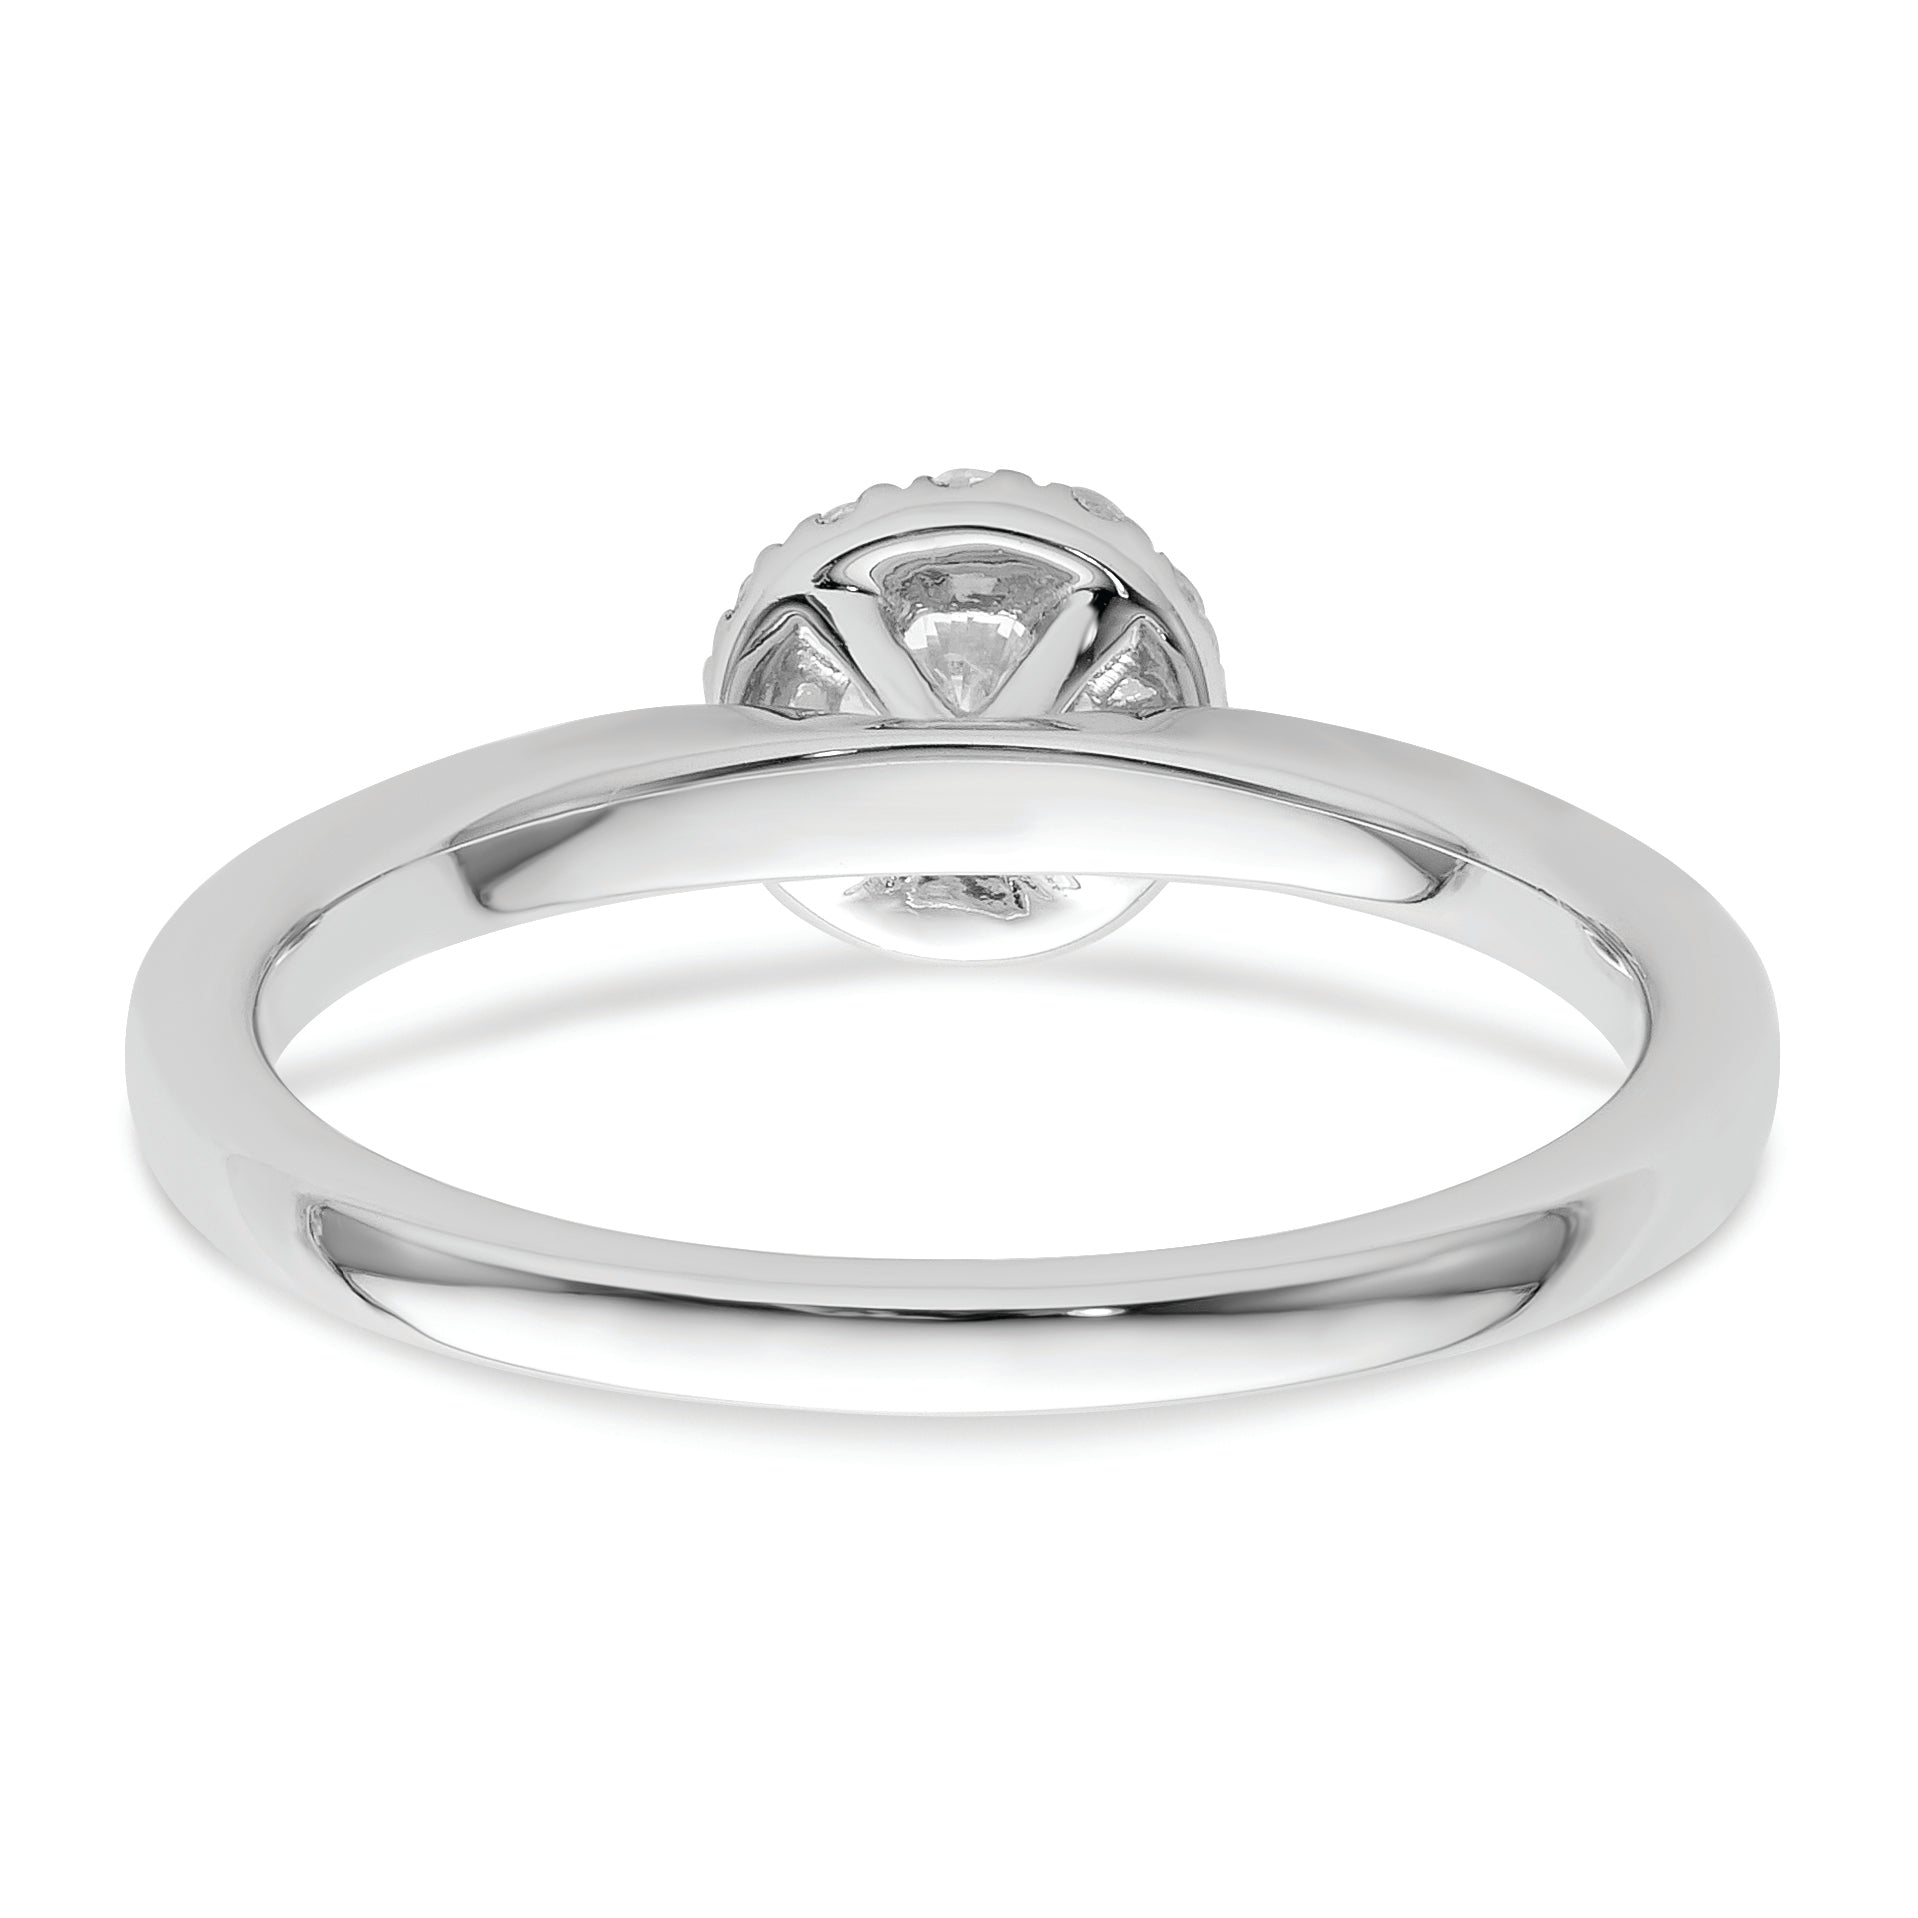 Two Promises 14k White Gold Diamond Round Halo Complete Engagement Ring